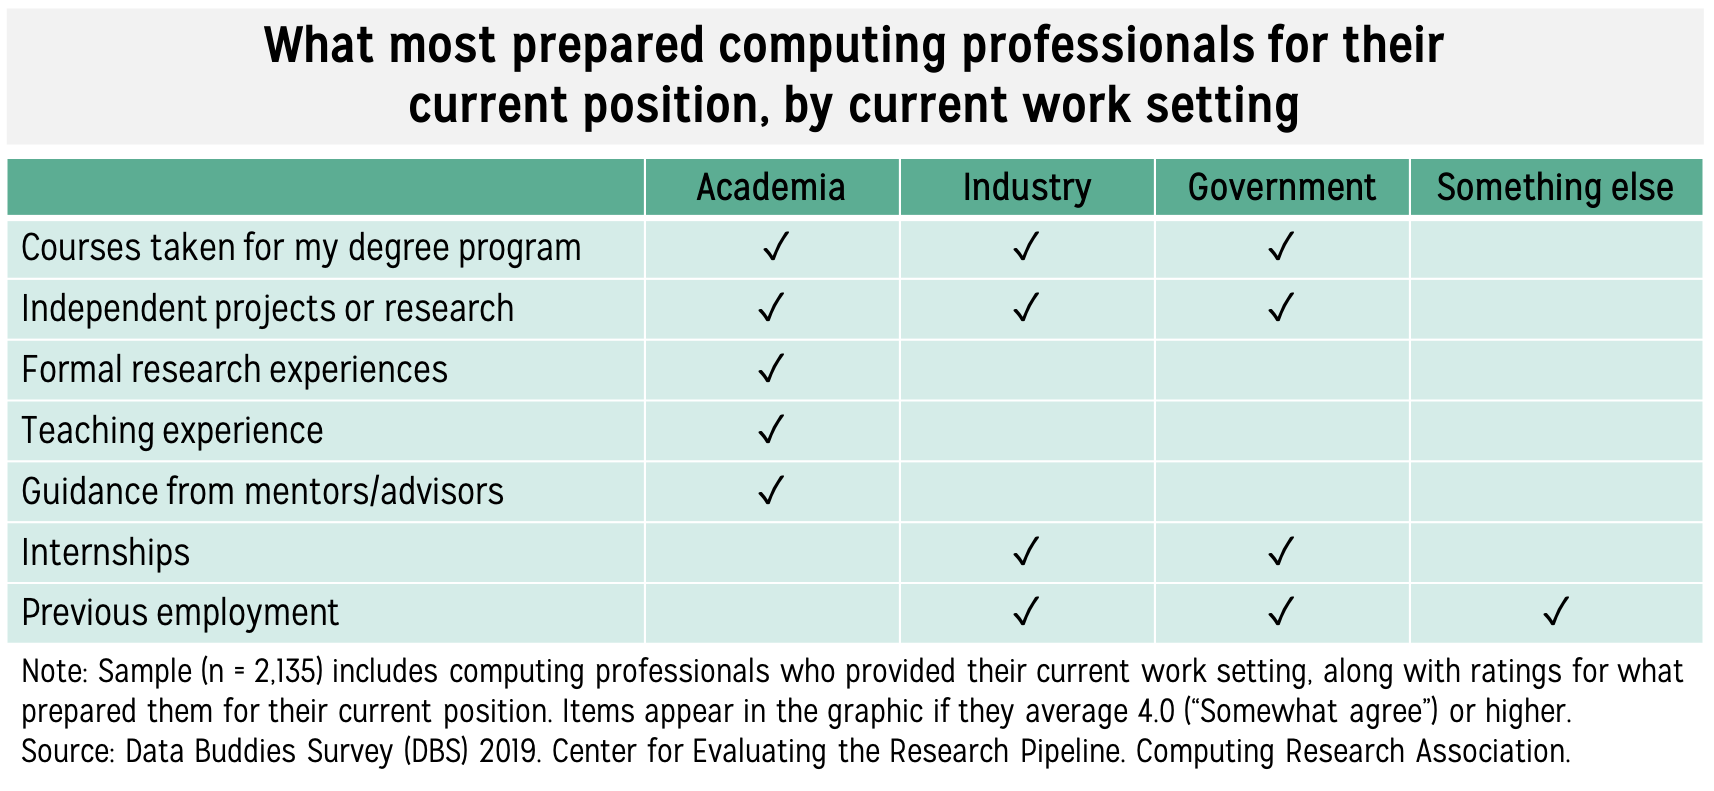 A table of what current computing professionals thought prepared them most for their current position, based on the setting they work in. The contents of the table are discussed in the main text of this post.